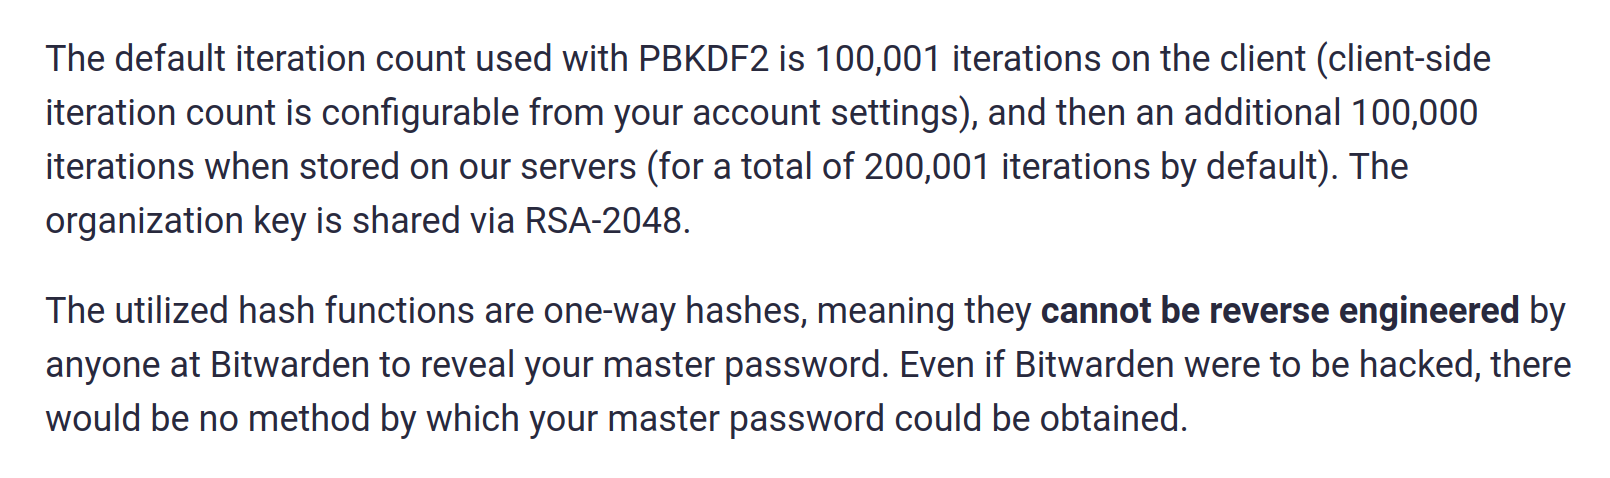 Screenshot of text from the Bitwarden website: The default iteration count used with PBKDF2 is 100,001 iterations on the client (client-side iteration count is configurable from your account settings), and then an additional 100,000 iterations when stored on our servers (for a total of 200,001 iterations by default). The organization key is shared via RSA-2048. The utilized hash functions are one-way hashes, meaning they cannot be reverse engineered by anyone at Bitwarden to reveal your master password. Even if Bitwarden were to be hacked, there would be no method by which your master password could be obtained.